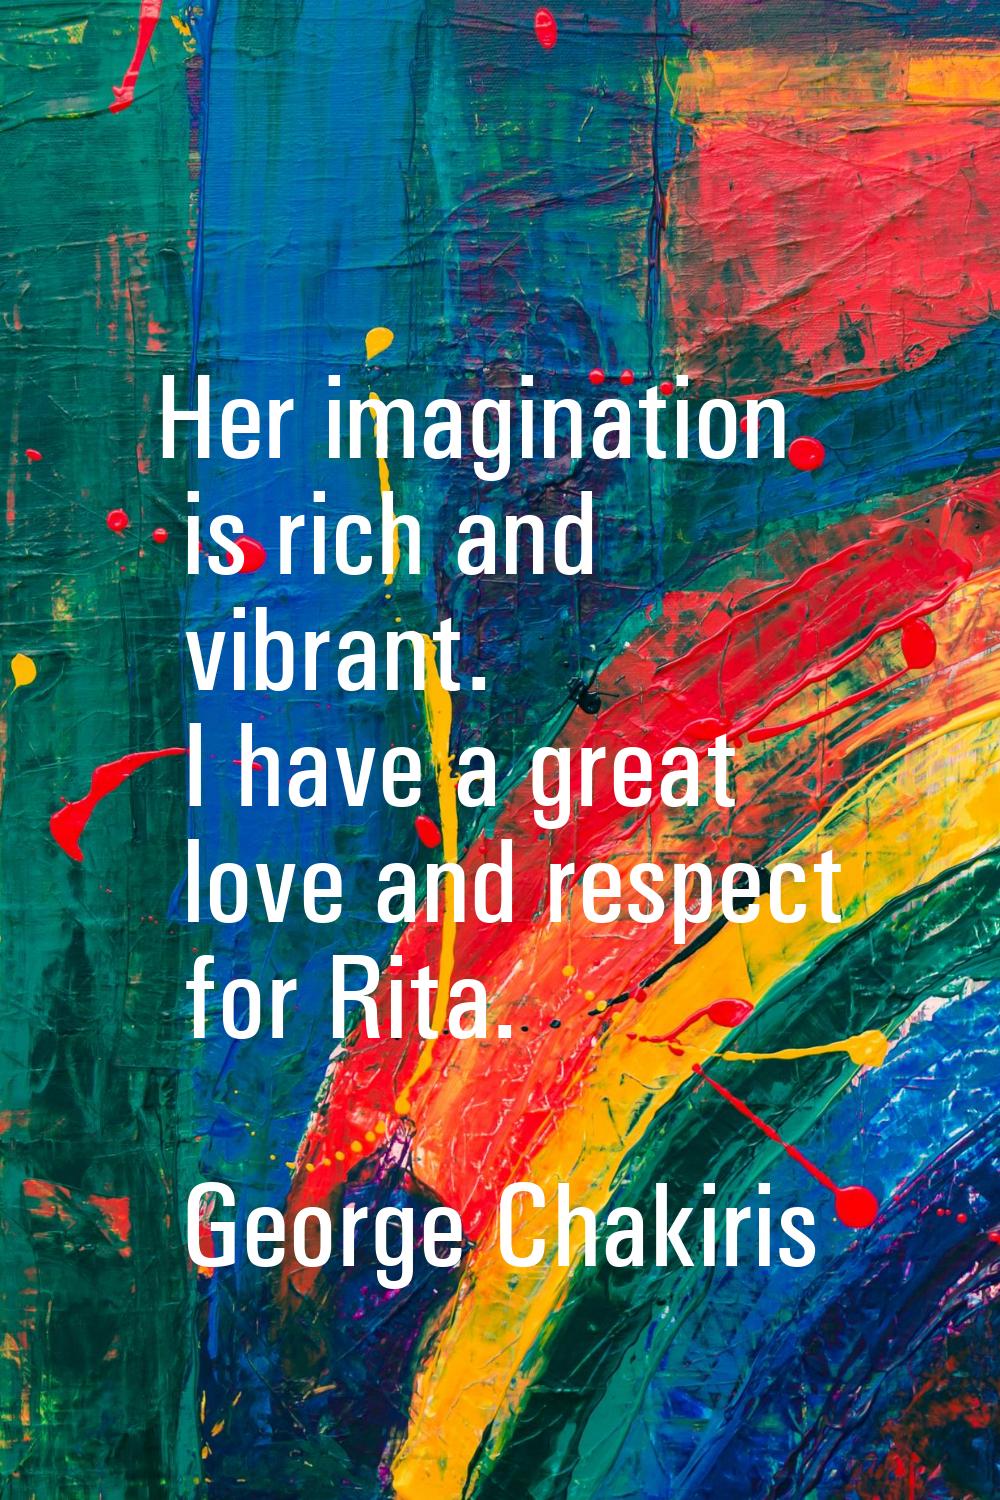 Her imagination is rich and vibrant. I have a great love and respect for Rita.